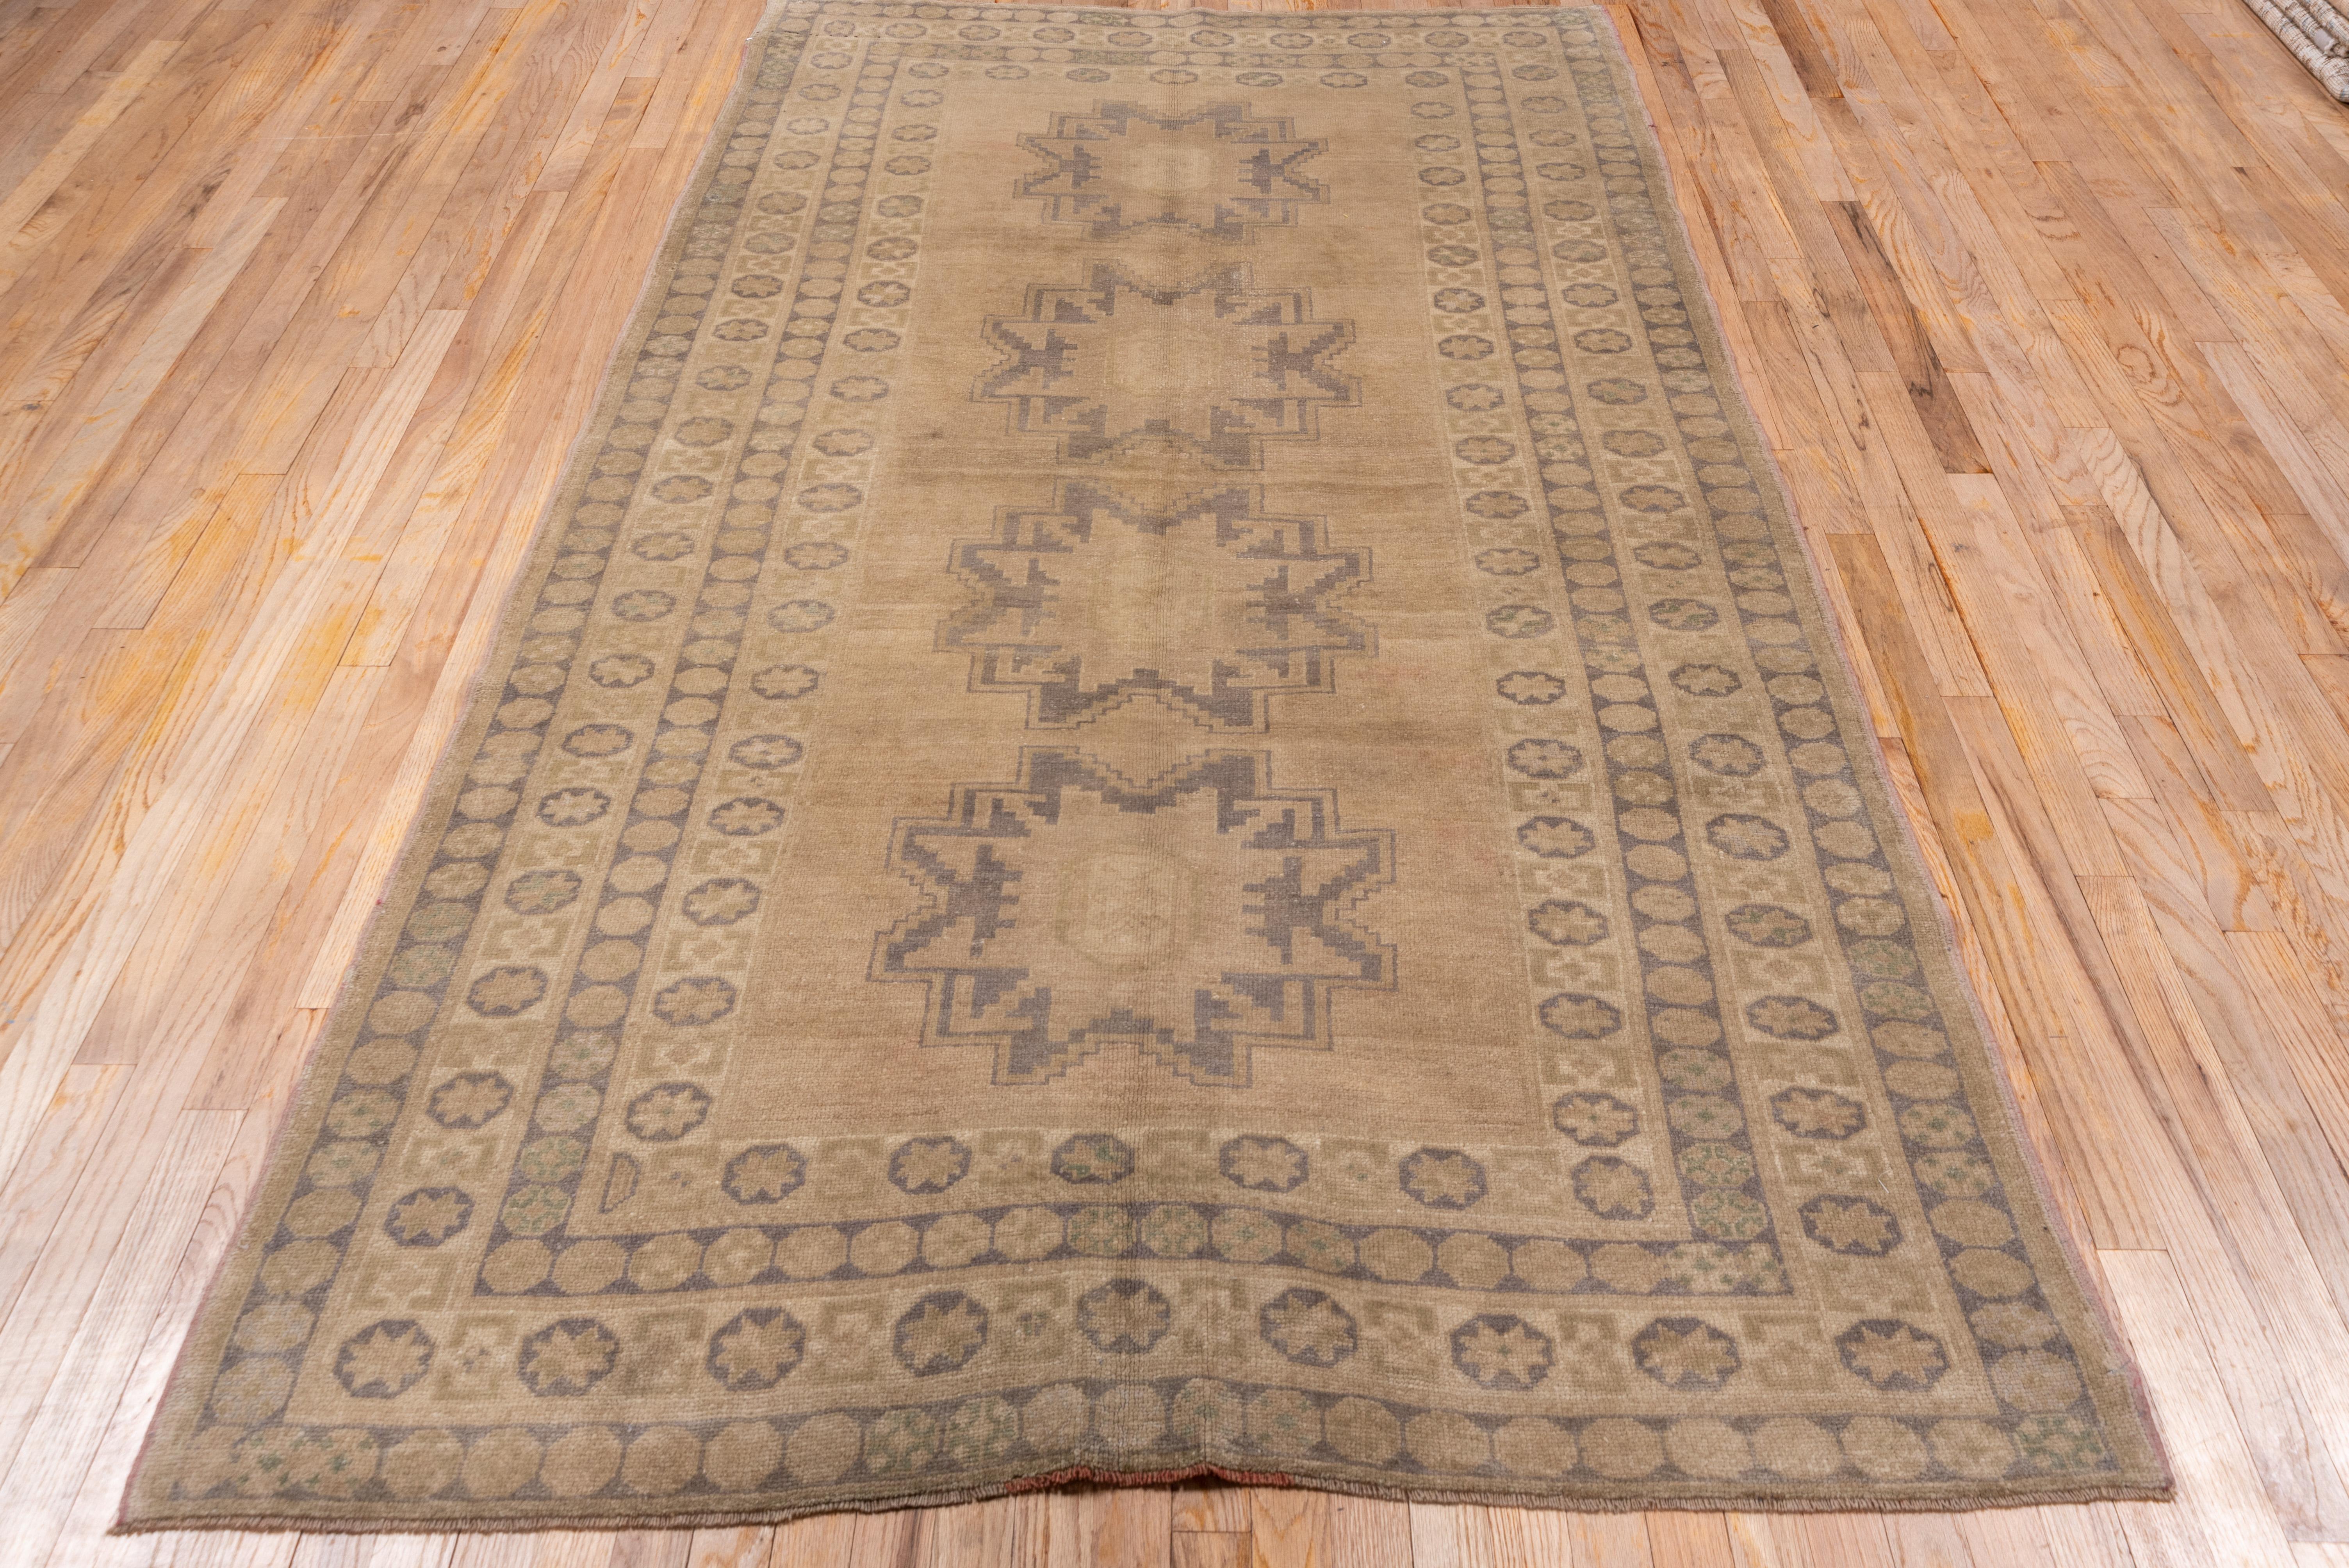 Antique Turkish Oushak Long Rug, Beige Field & Graphite Blue Accents In Good Condition For Sale In New York, NY